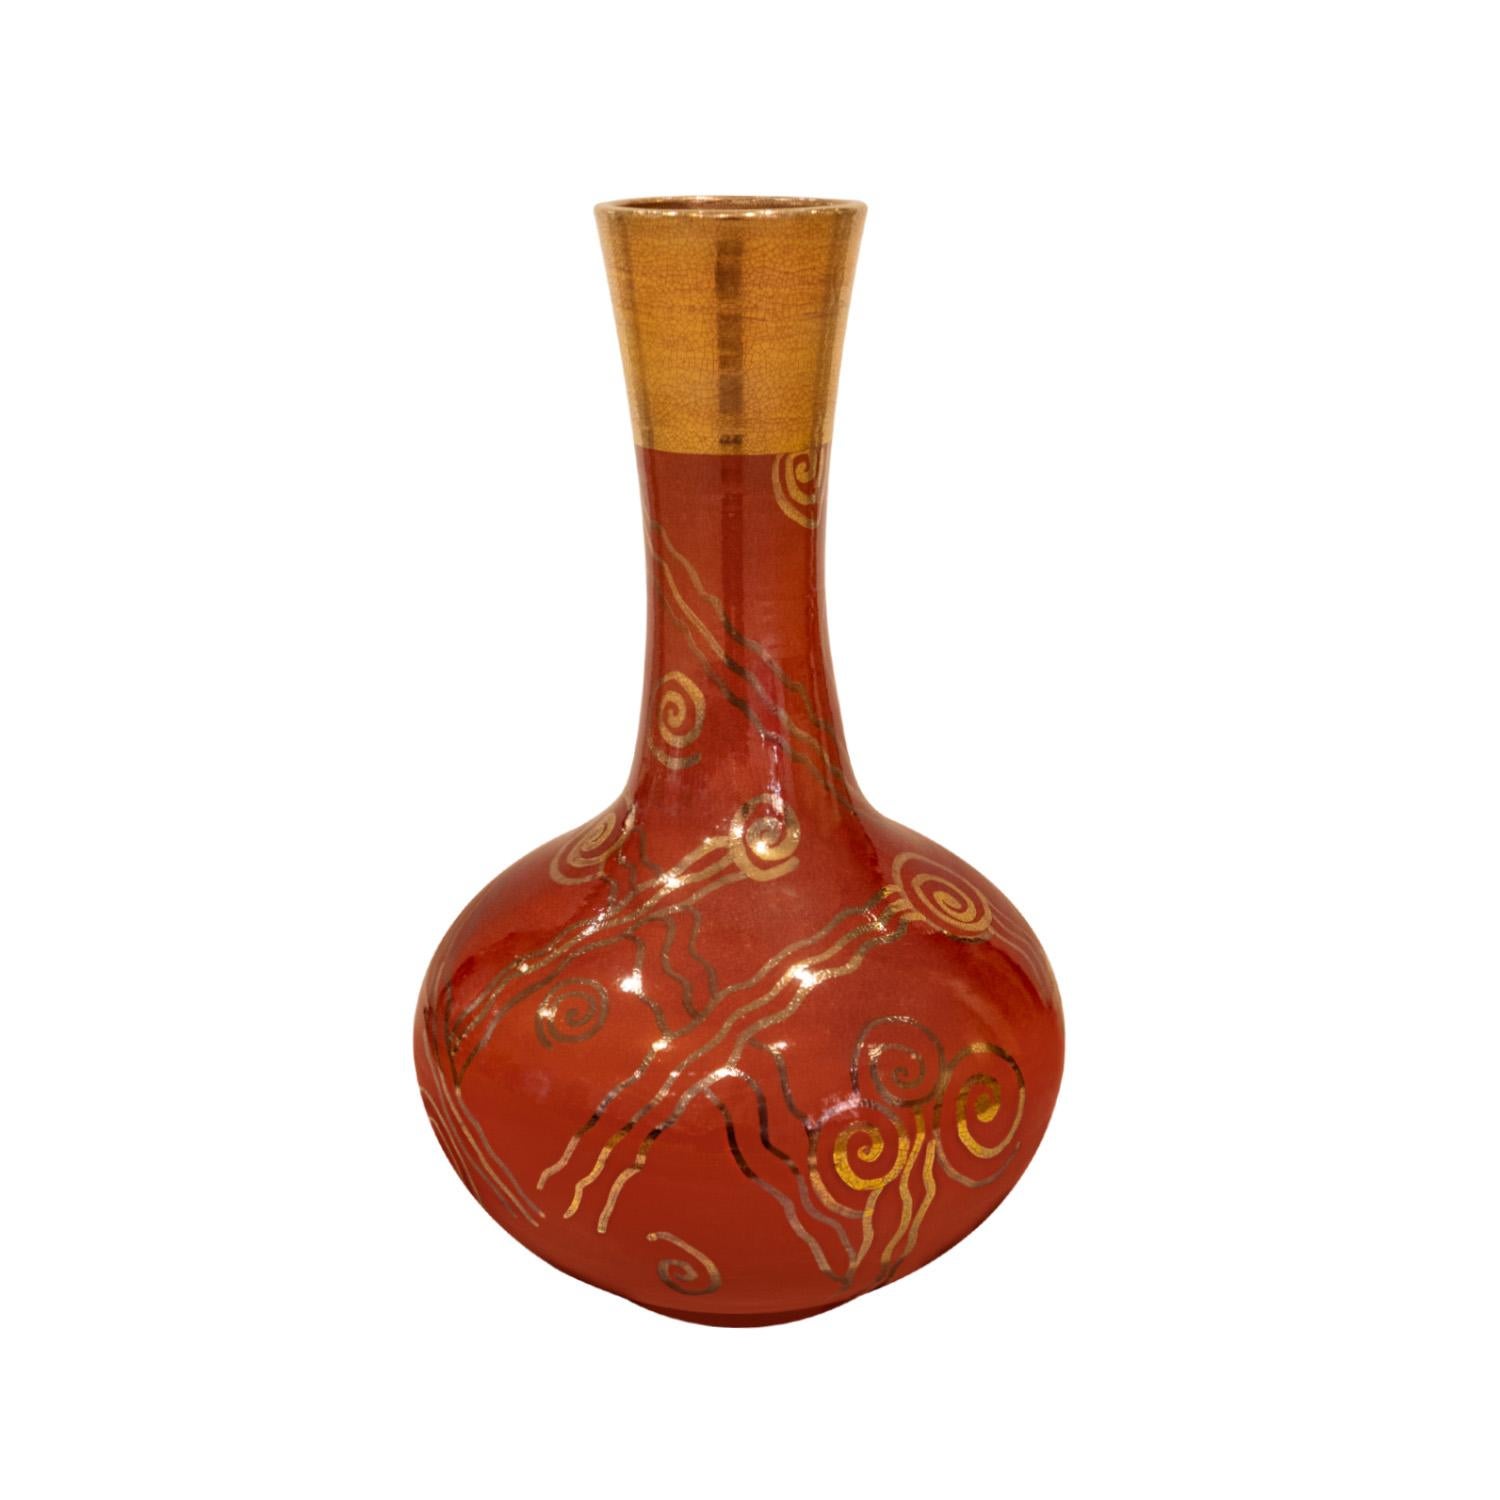 Hand-thrown ceramic vase in Chinese red glaze with applied gold decorative motif by Gary McCloy, American 1970's (signed on the bottom). This vase is impressive and has a lot of visual depth. The combination of Chinese red with gold overlaid is